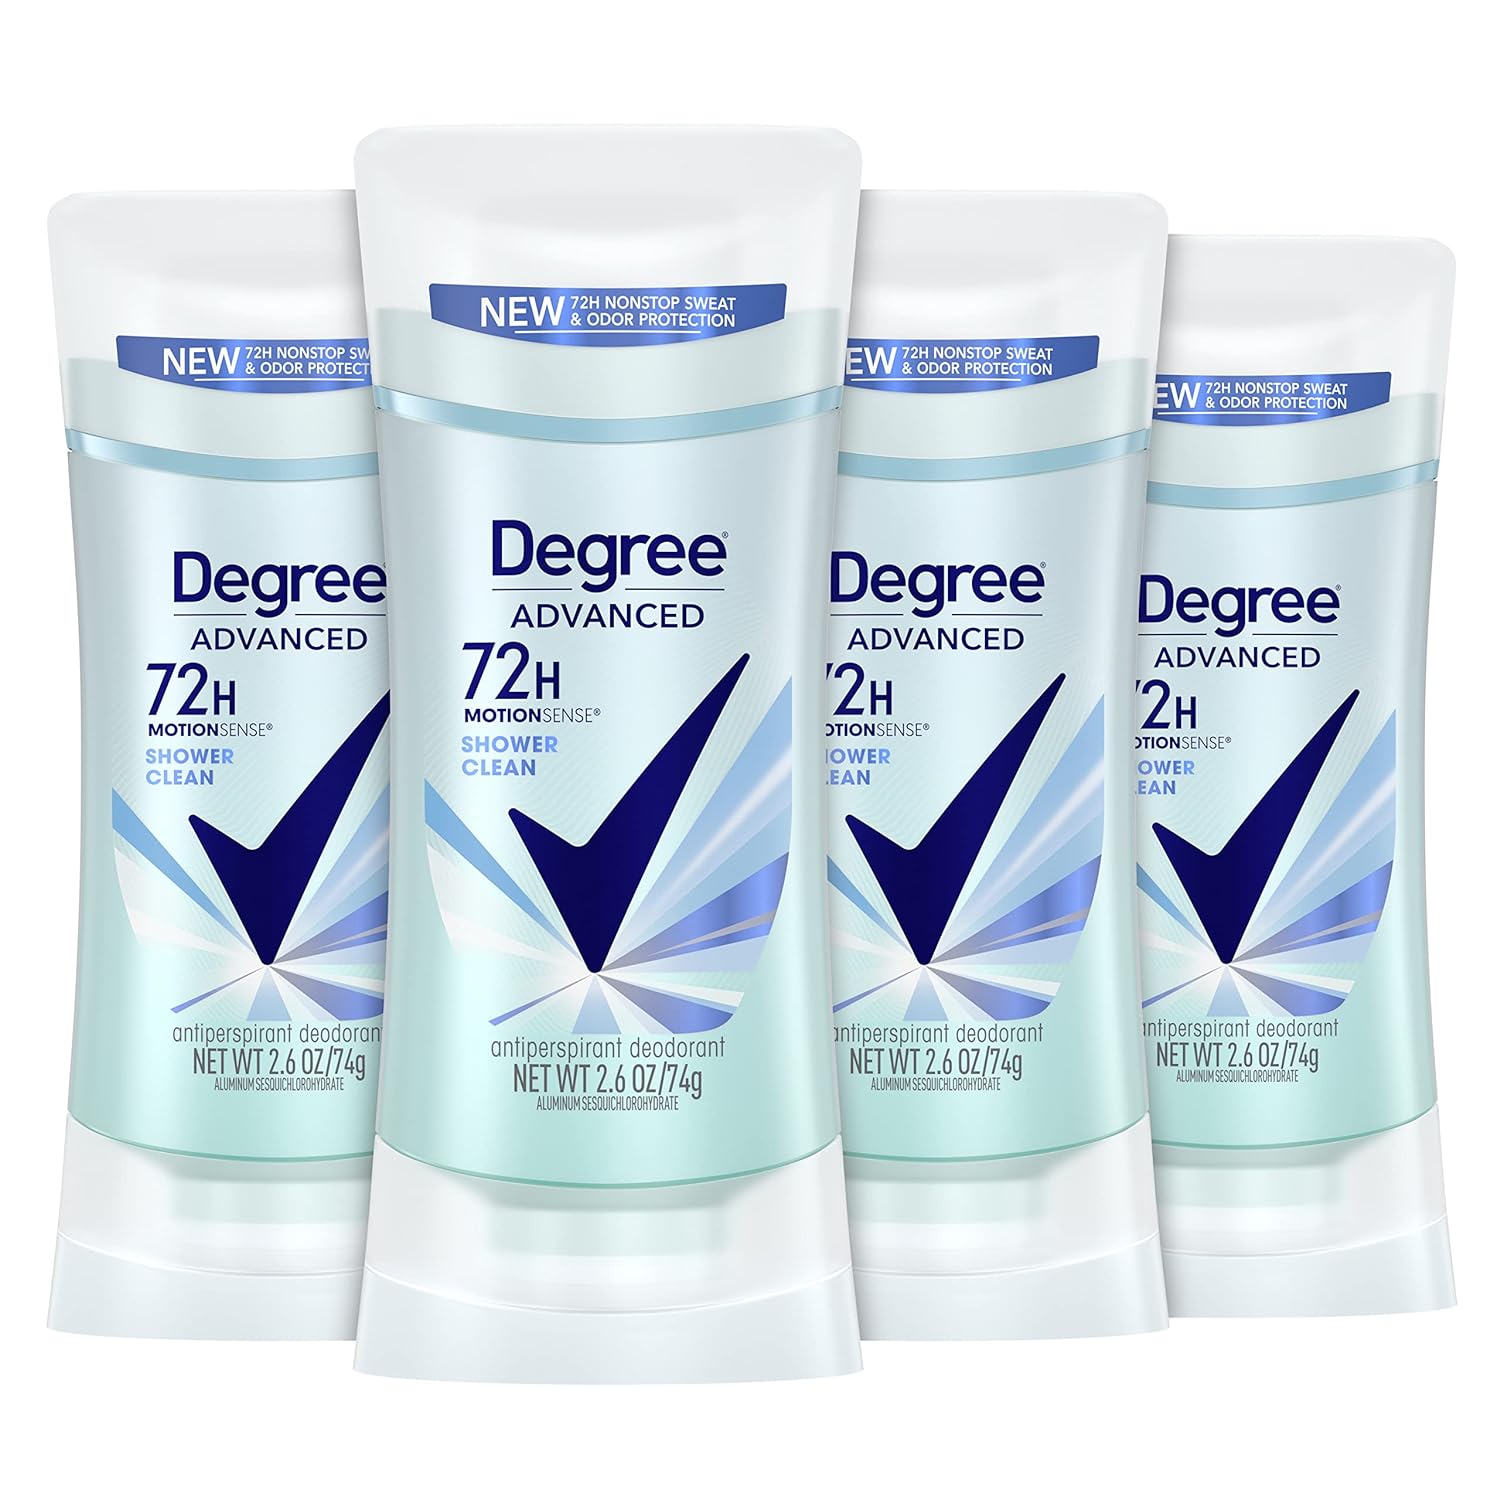 Degree Advanced Antiperspirant Deodorant 4 count 72-Hour Sweat & Odor Protection Shower Clean Antiperspirant for Women with MotionSense Technology 2.6 oz